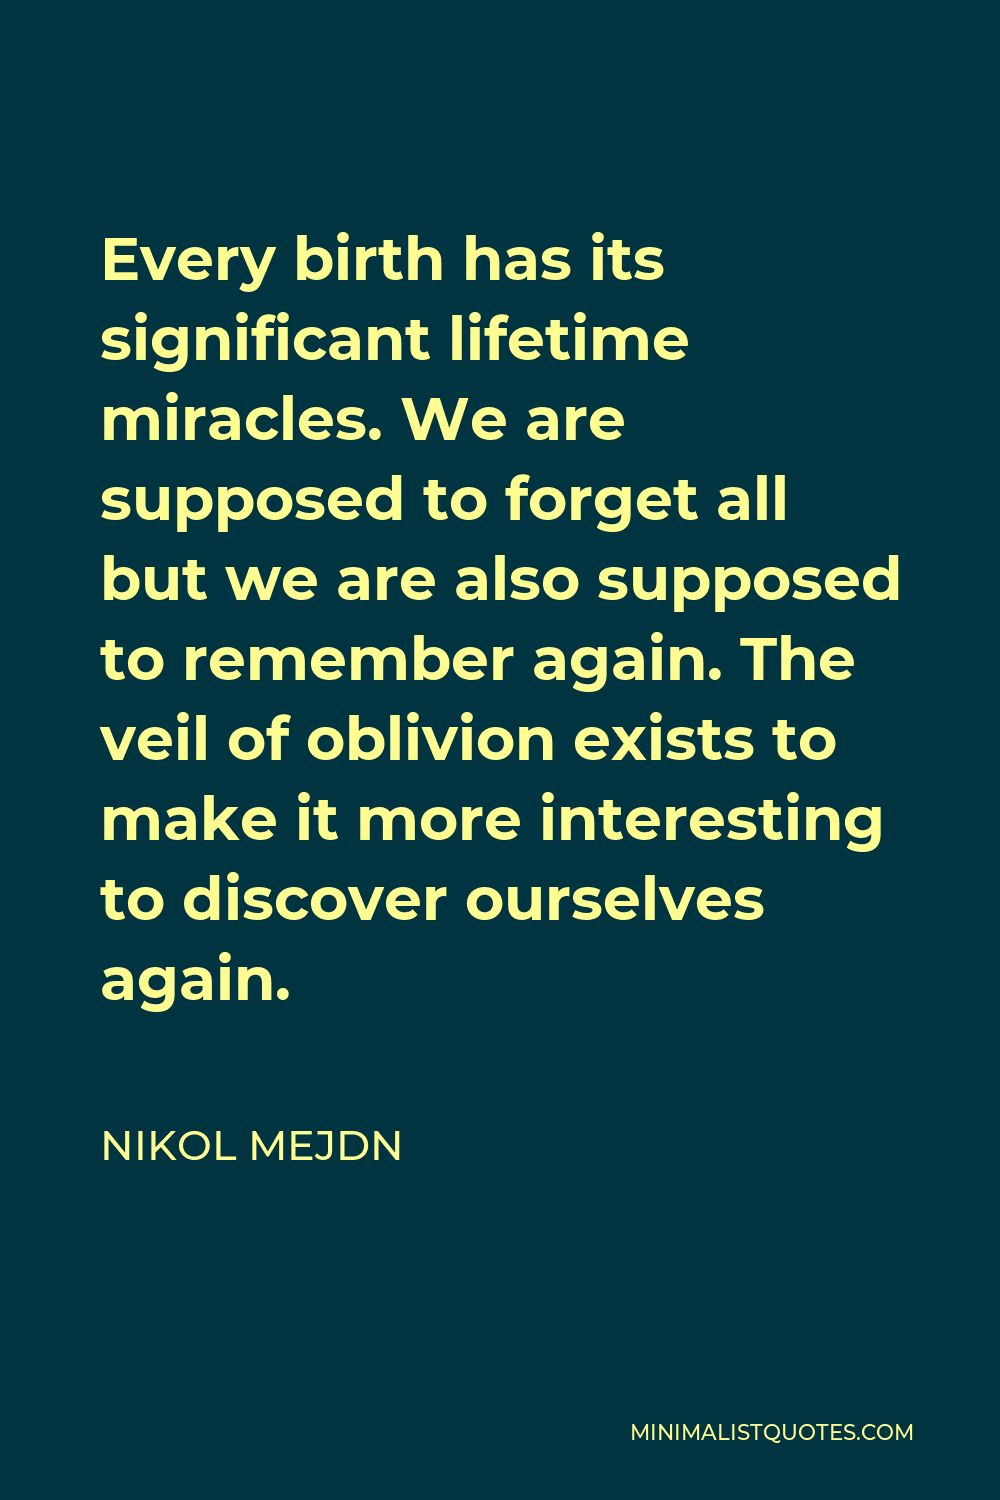 Nikol Mejdn Quote - Every birth has its significant lifetime miracles. We are supposed to forget all but we are also supposed to remember again. The veil of oblivion exists to make it more interesting to discover ourselves again.